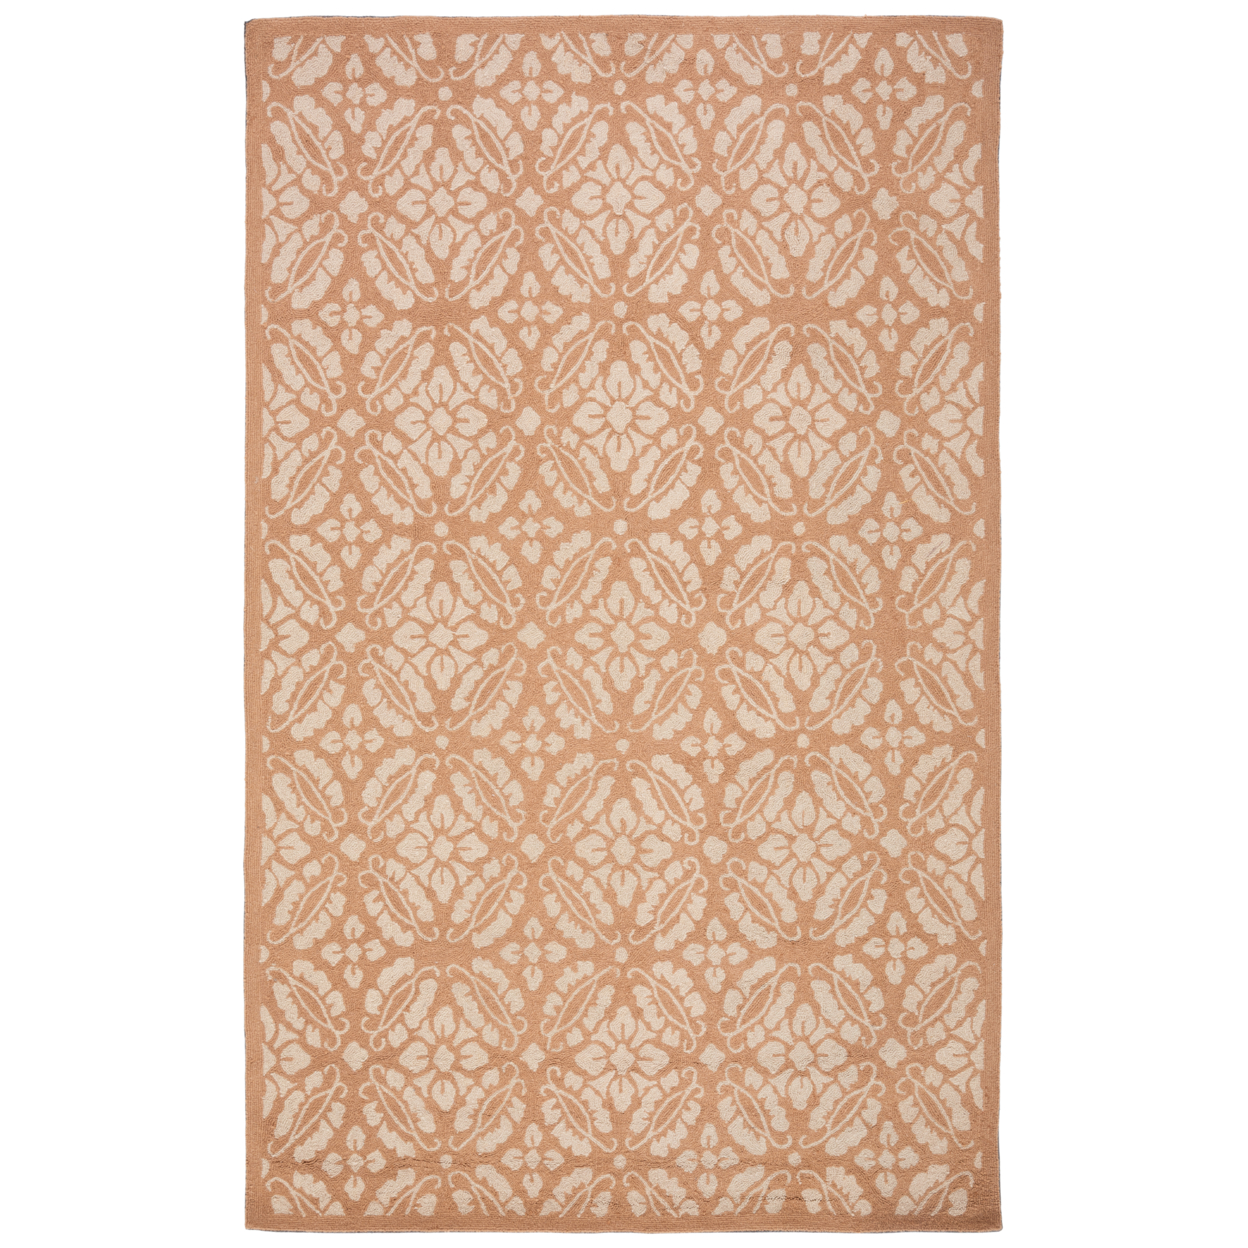 SAFAVIEH Chelsea Collection HK723C Hand-hooked Blush Rug - 5' 3 X 8' 3